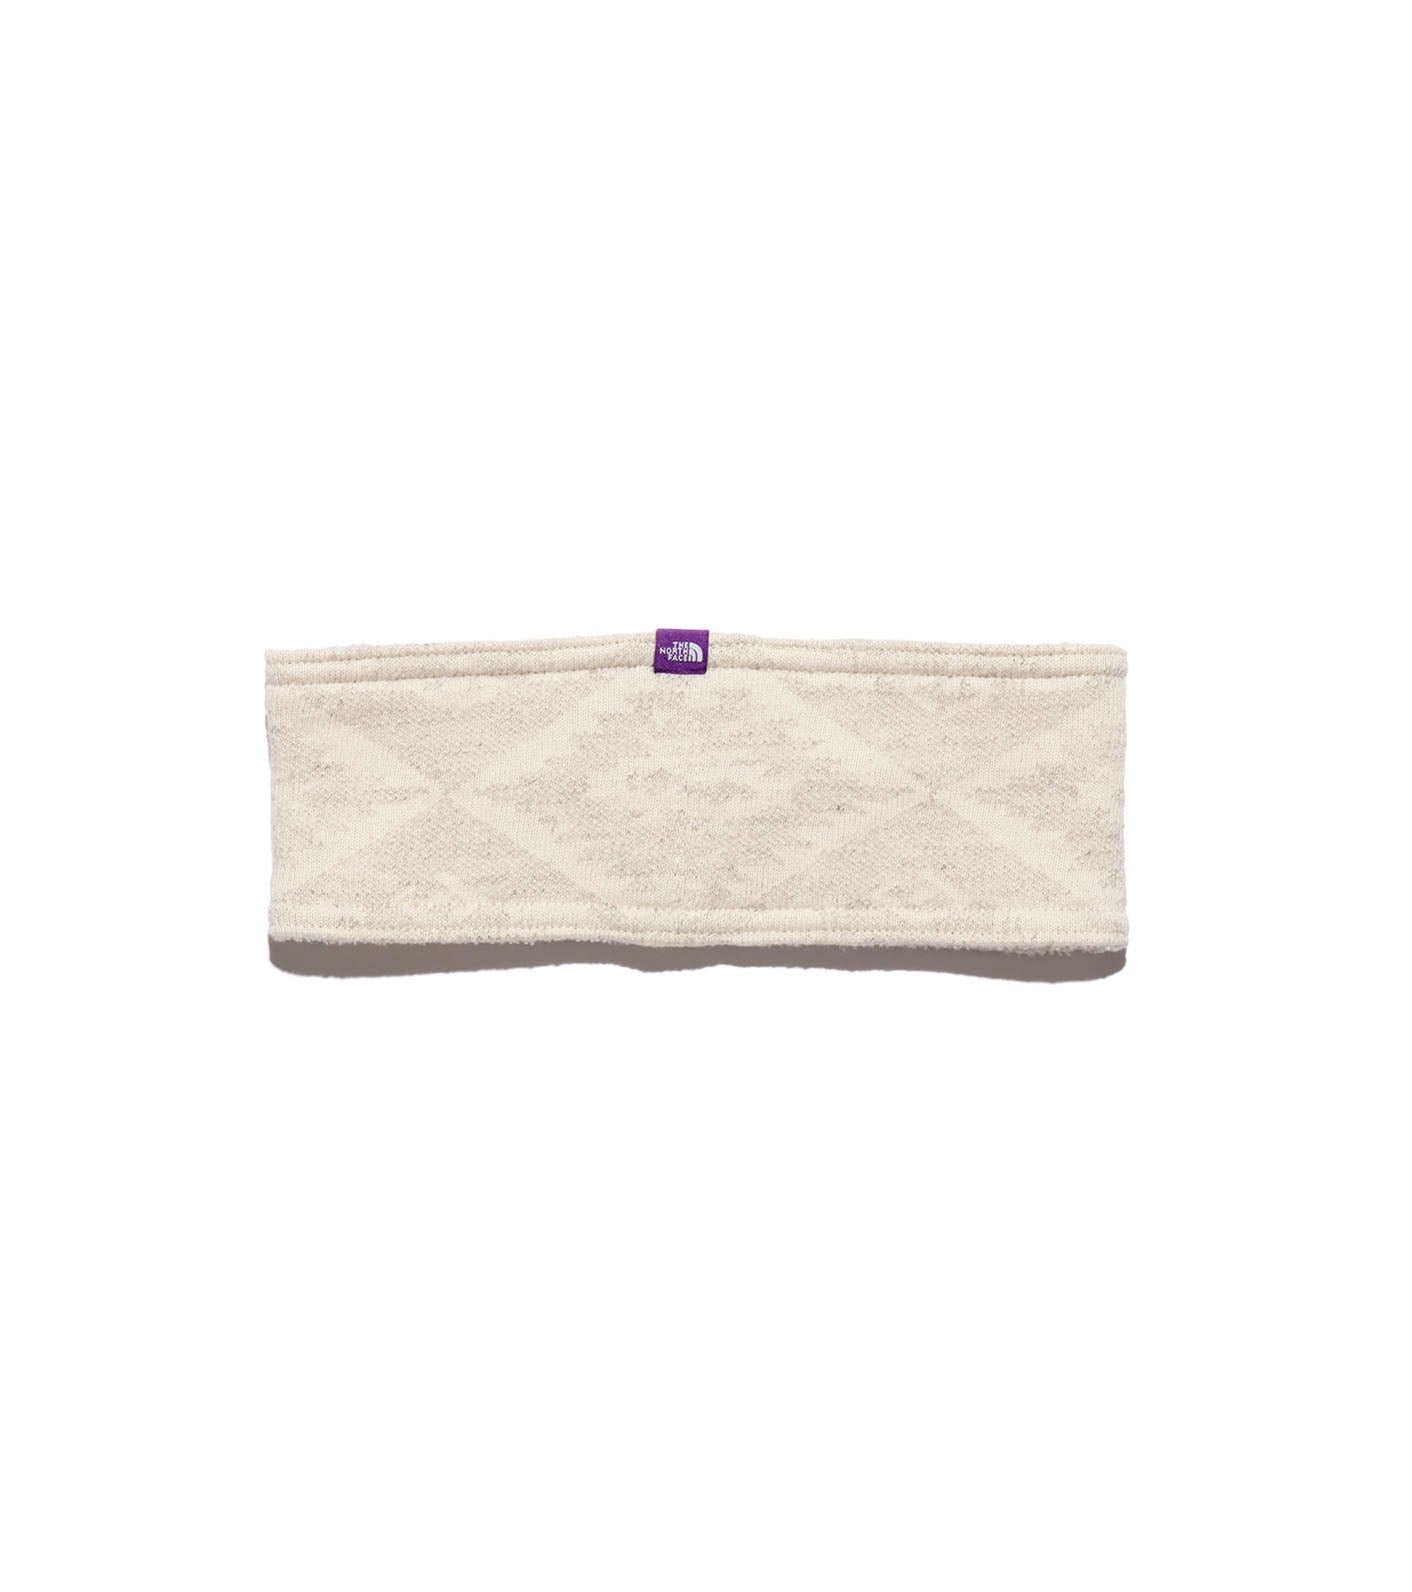 THE NORTH FACE PURPLE LABEL NP Jacquard Field Head Band